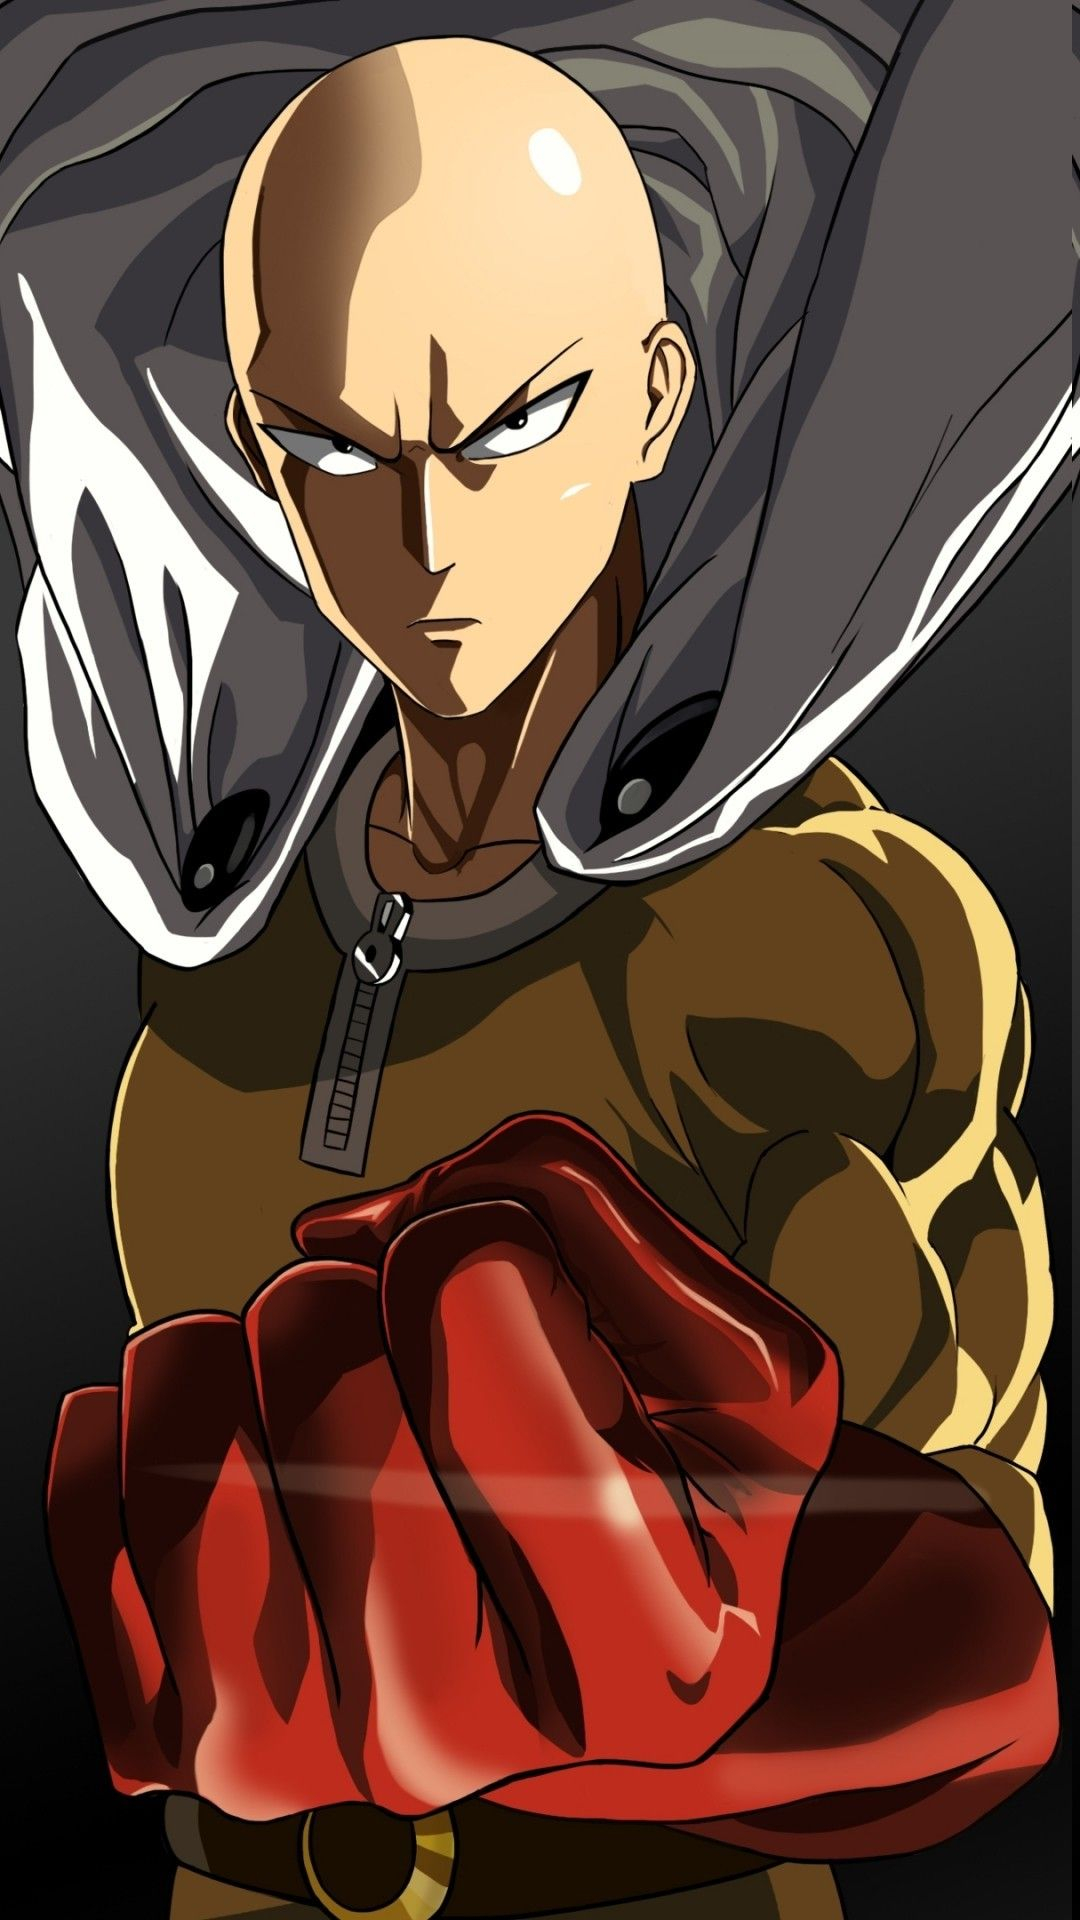 1080x1920 One Punch Man HD Wallpaper (72+ images) | One punch man anime, One punch man, Anime